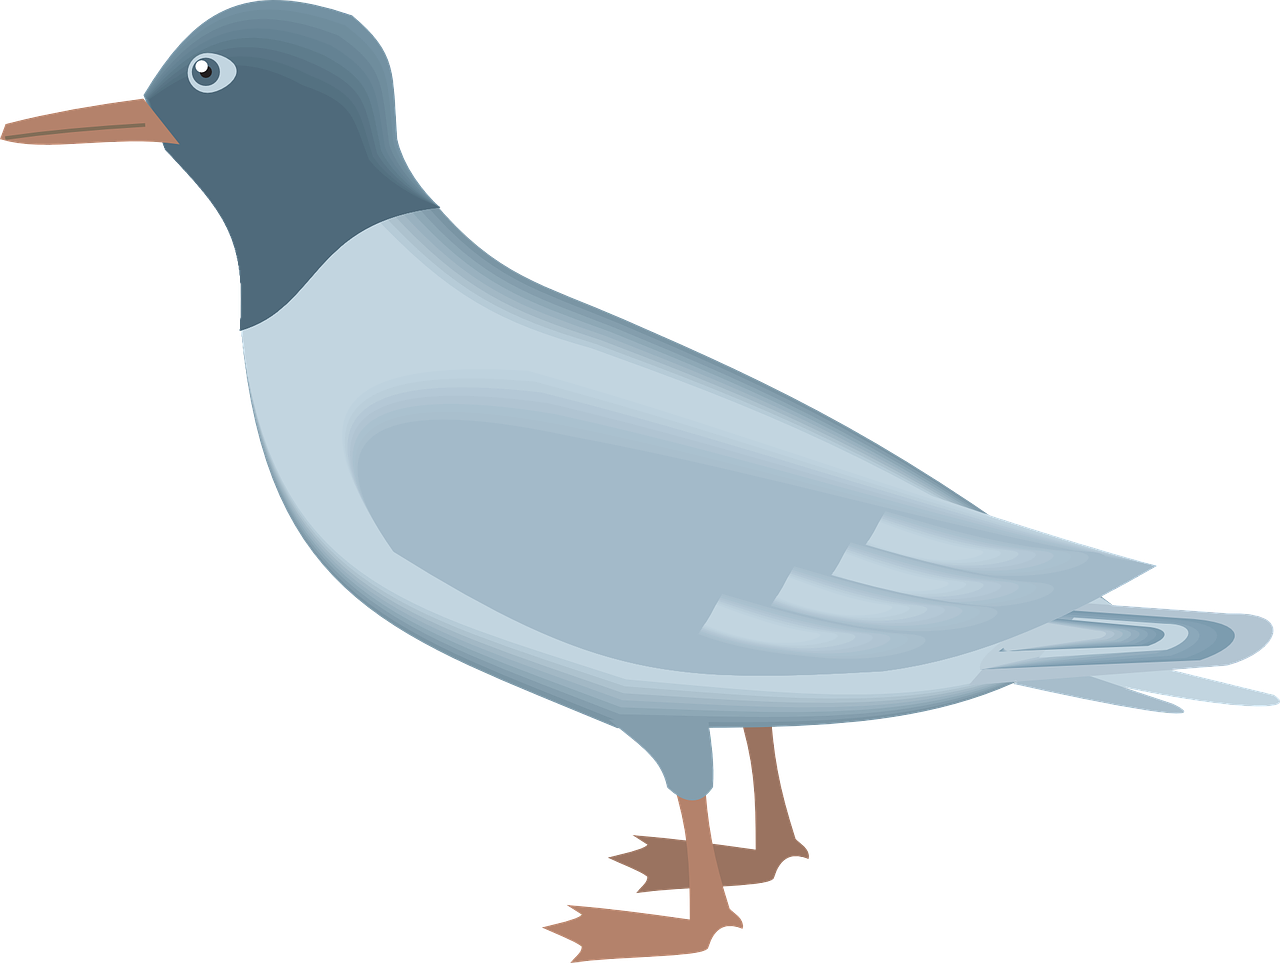 blue,bird,gull,wings,beak,feathers,free vector graphics,free pictures, free photos, free images, royalty free, free illustrations, public domain